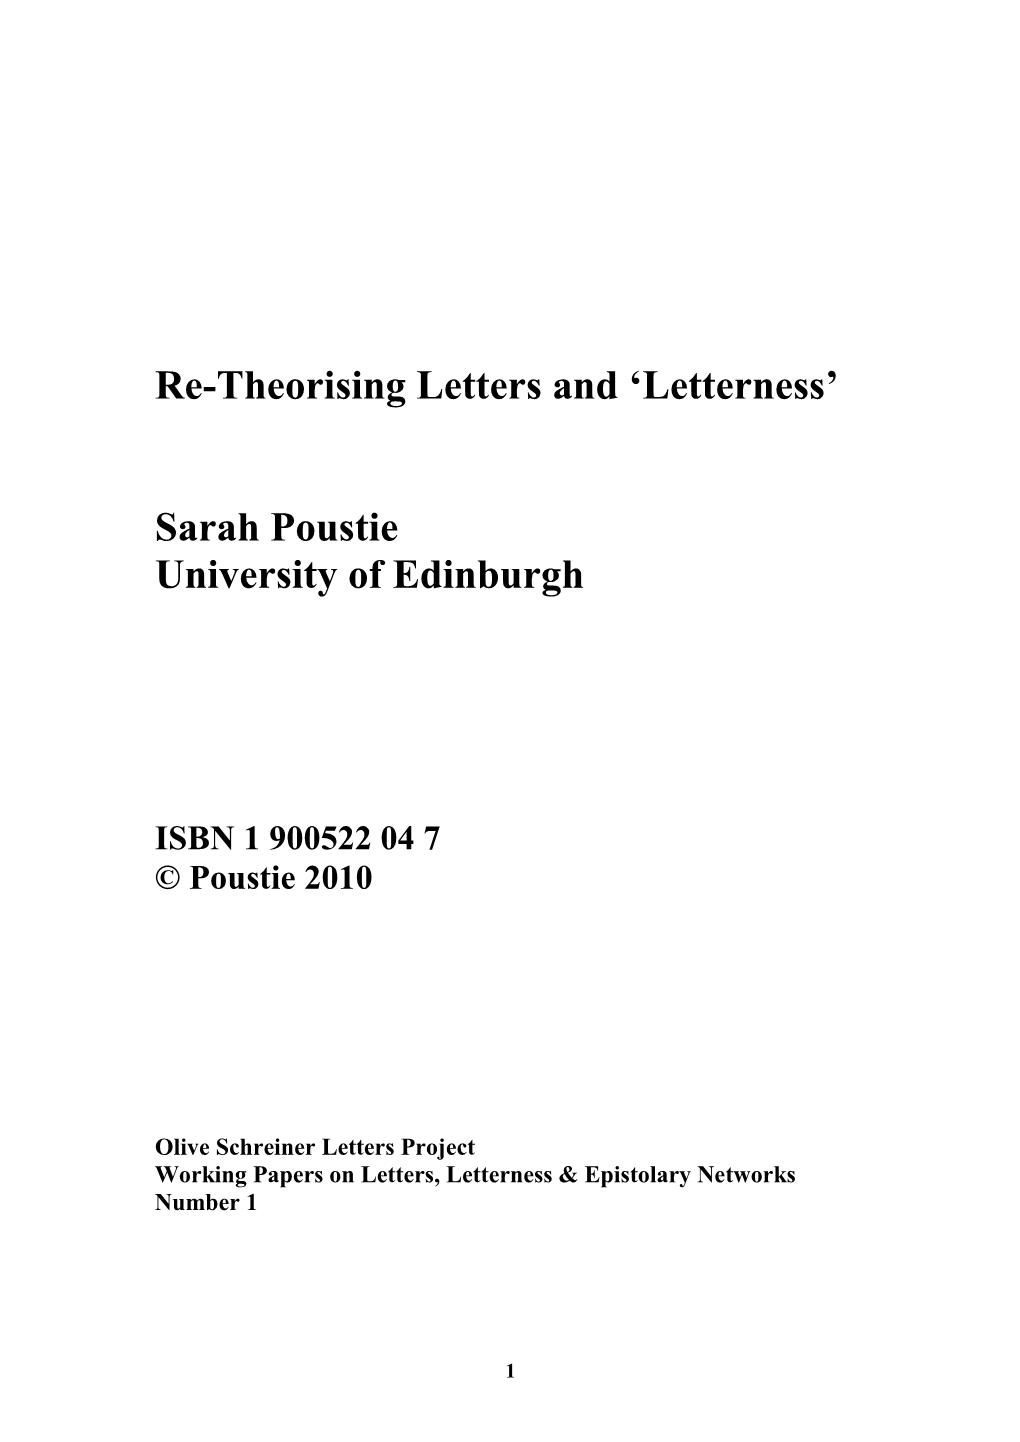 Re-Theorising Letters and 'Letterness' Sarah Poustie University of Edinburgh